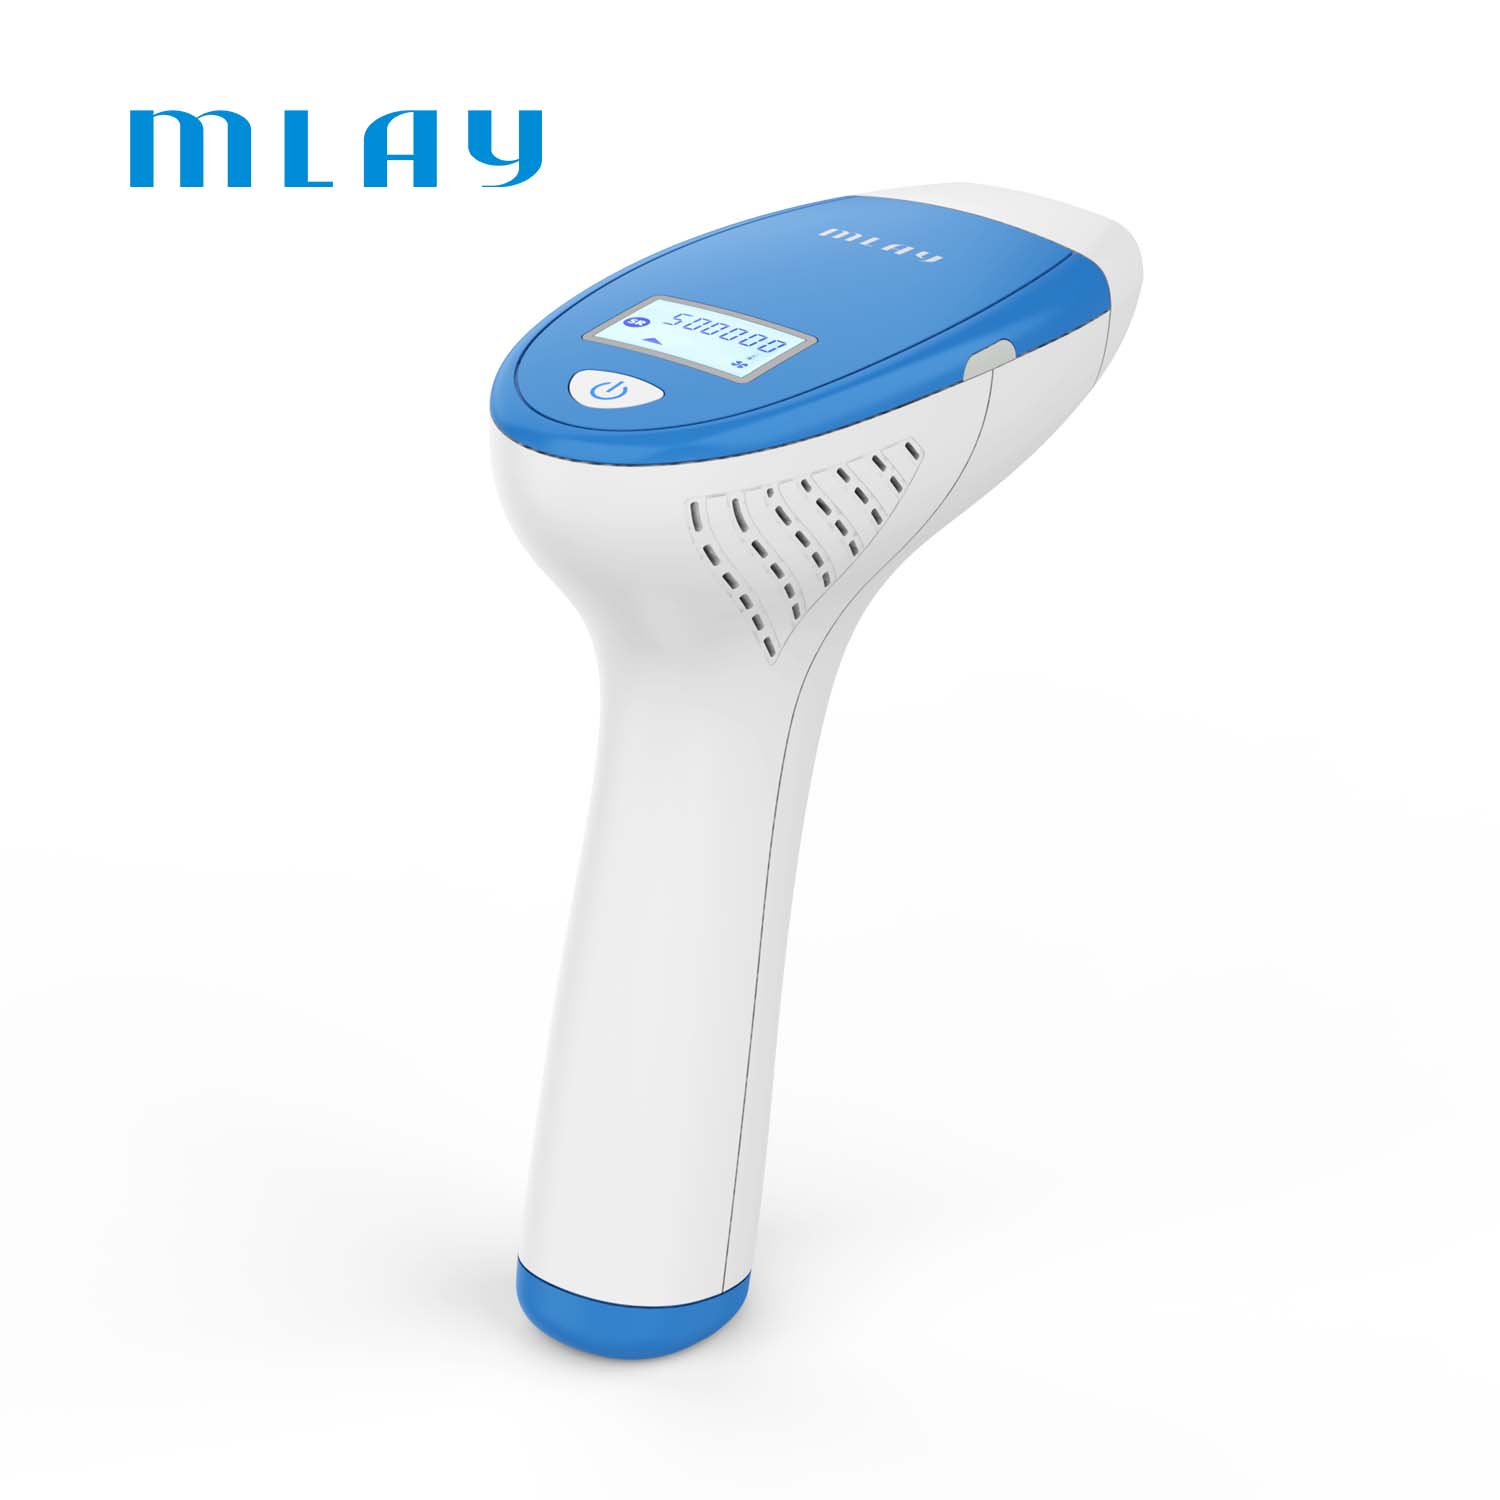 Dropshipping Advanced Perment Latest Portable Laser Hair Removal Home Use Hair Removal Laser Handset